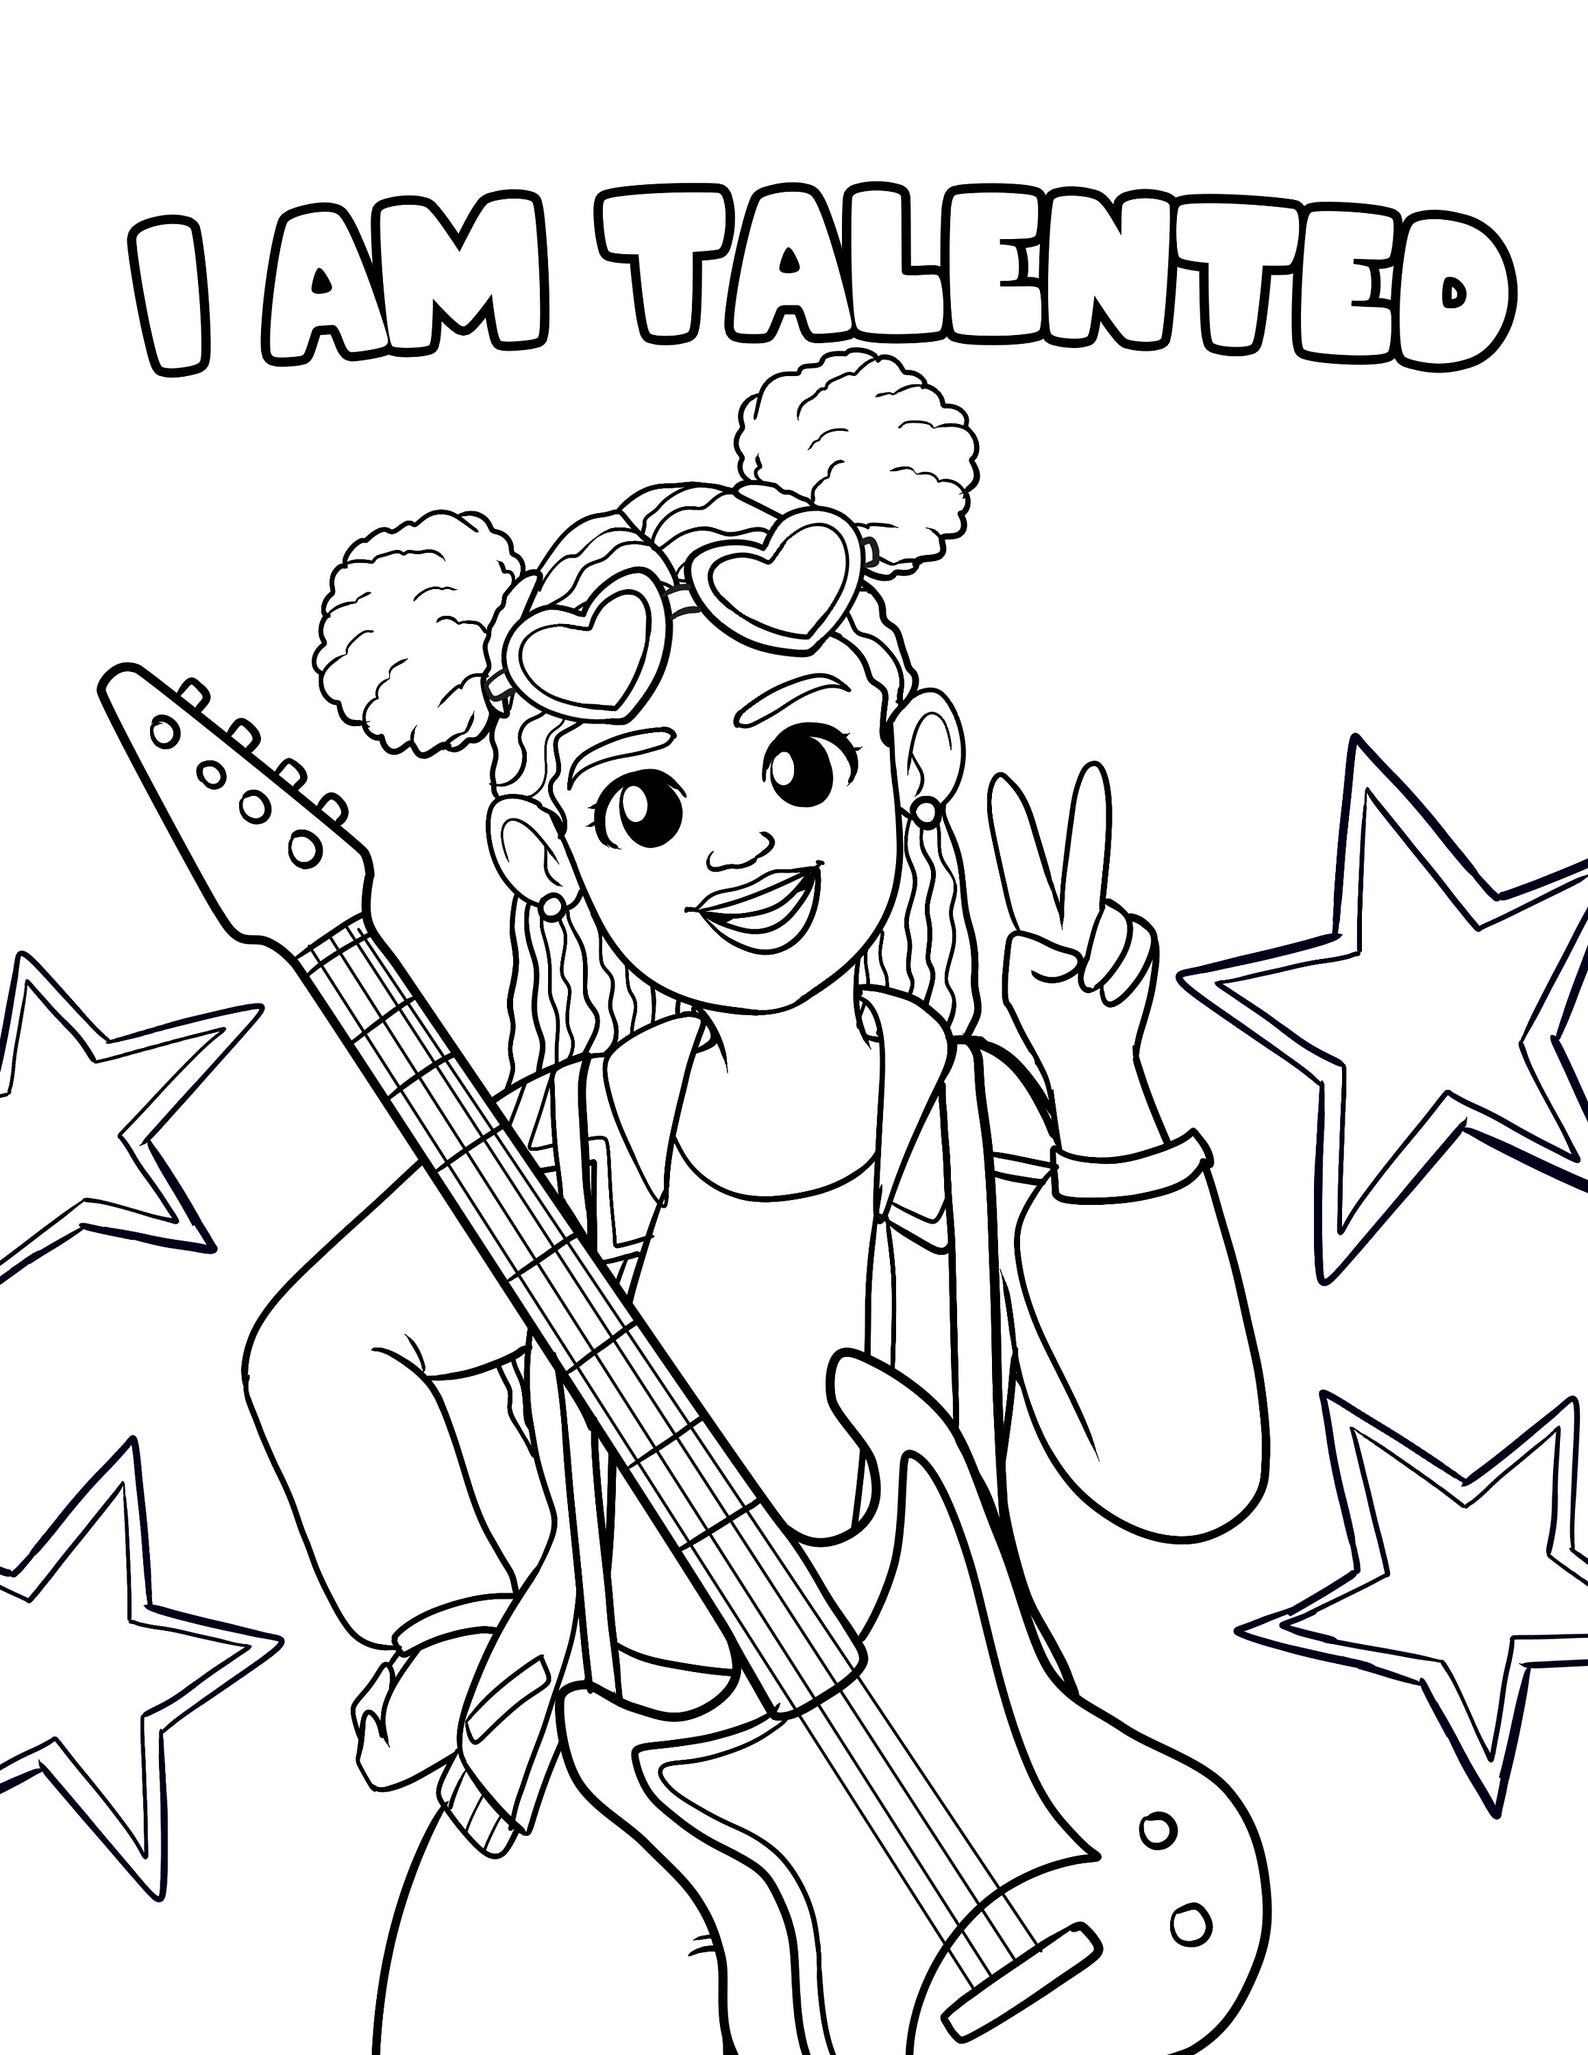 I AM affirmations coloring pages for children. | Etsy